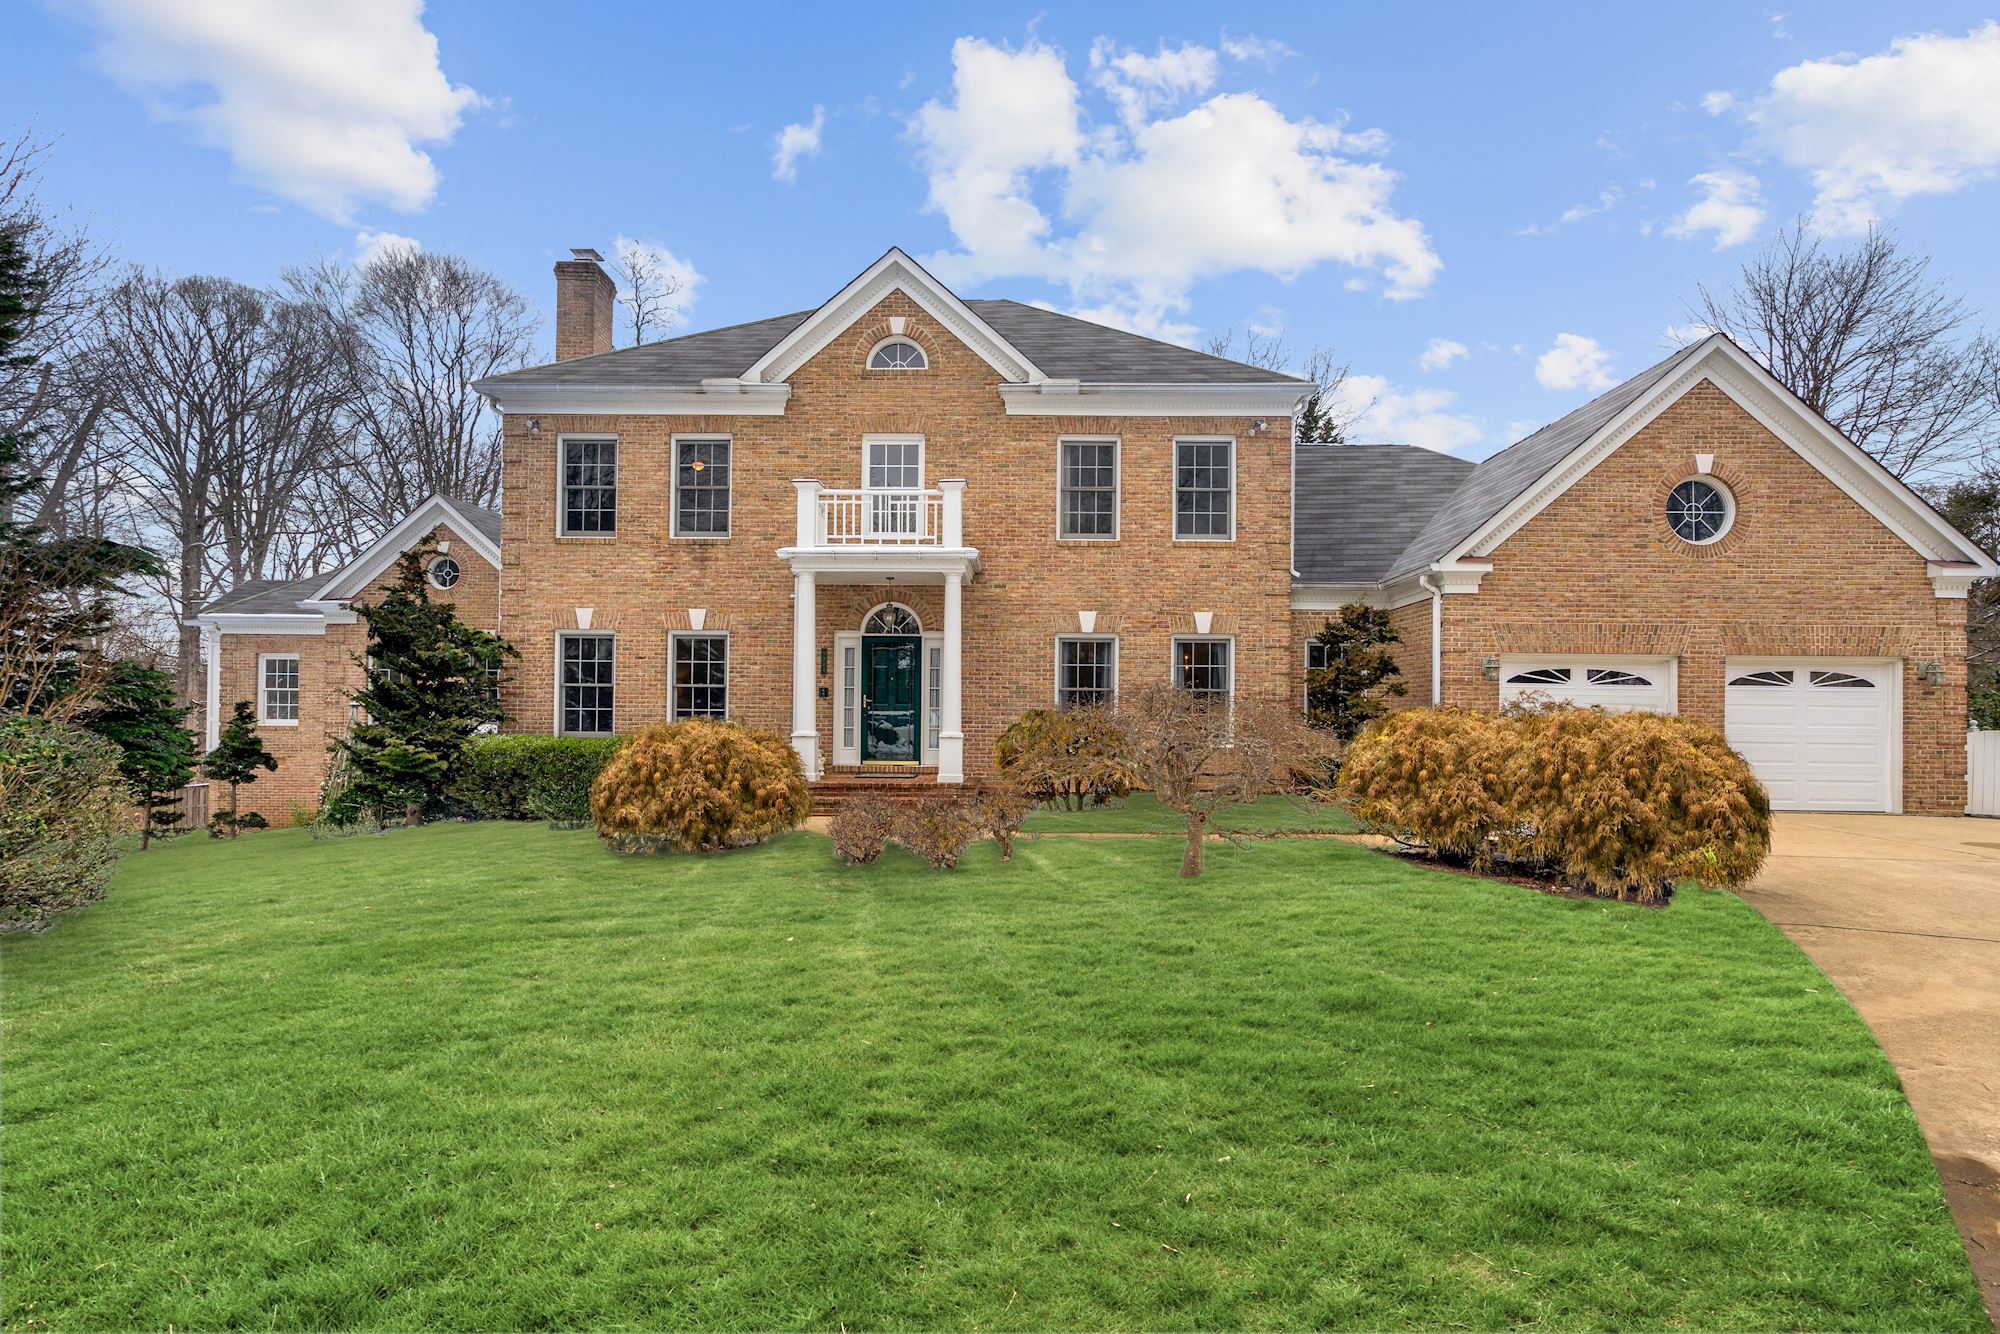 SOLD: Custom Colonial Home With Almost 7000 sqft in Community of Vienna Glen